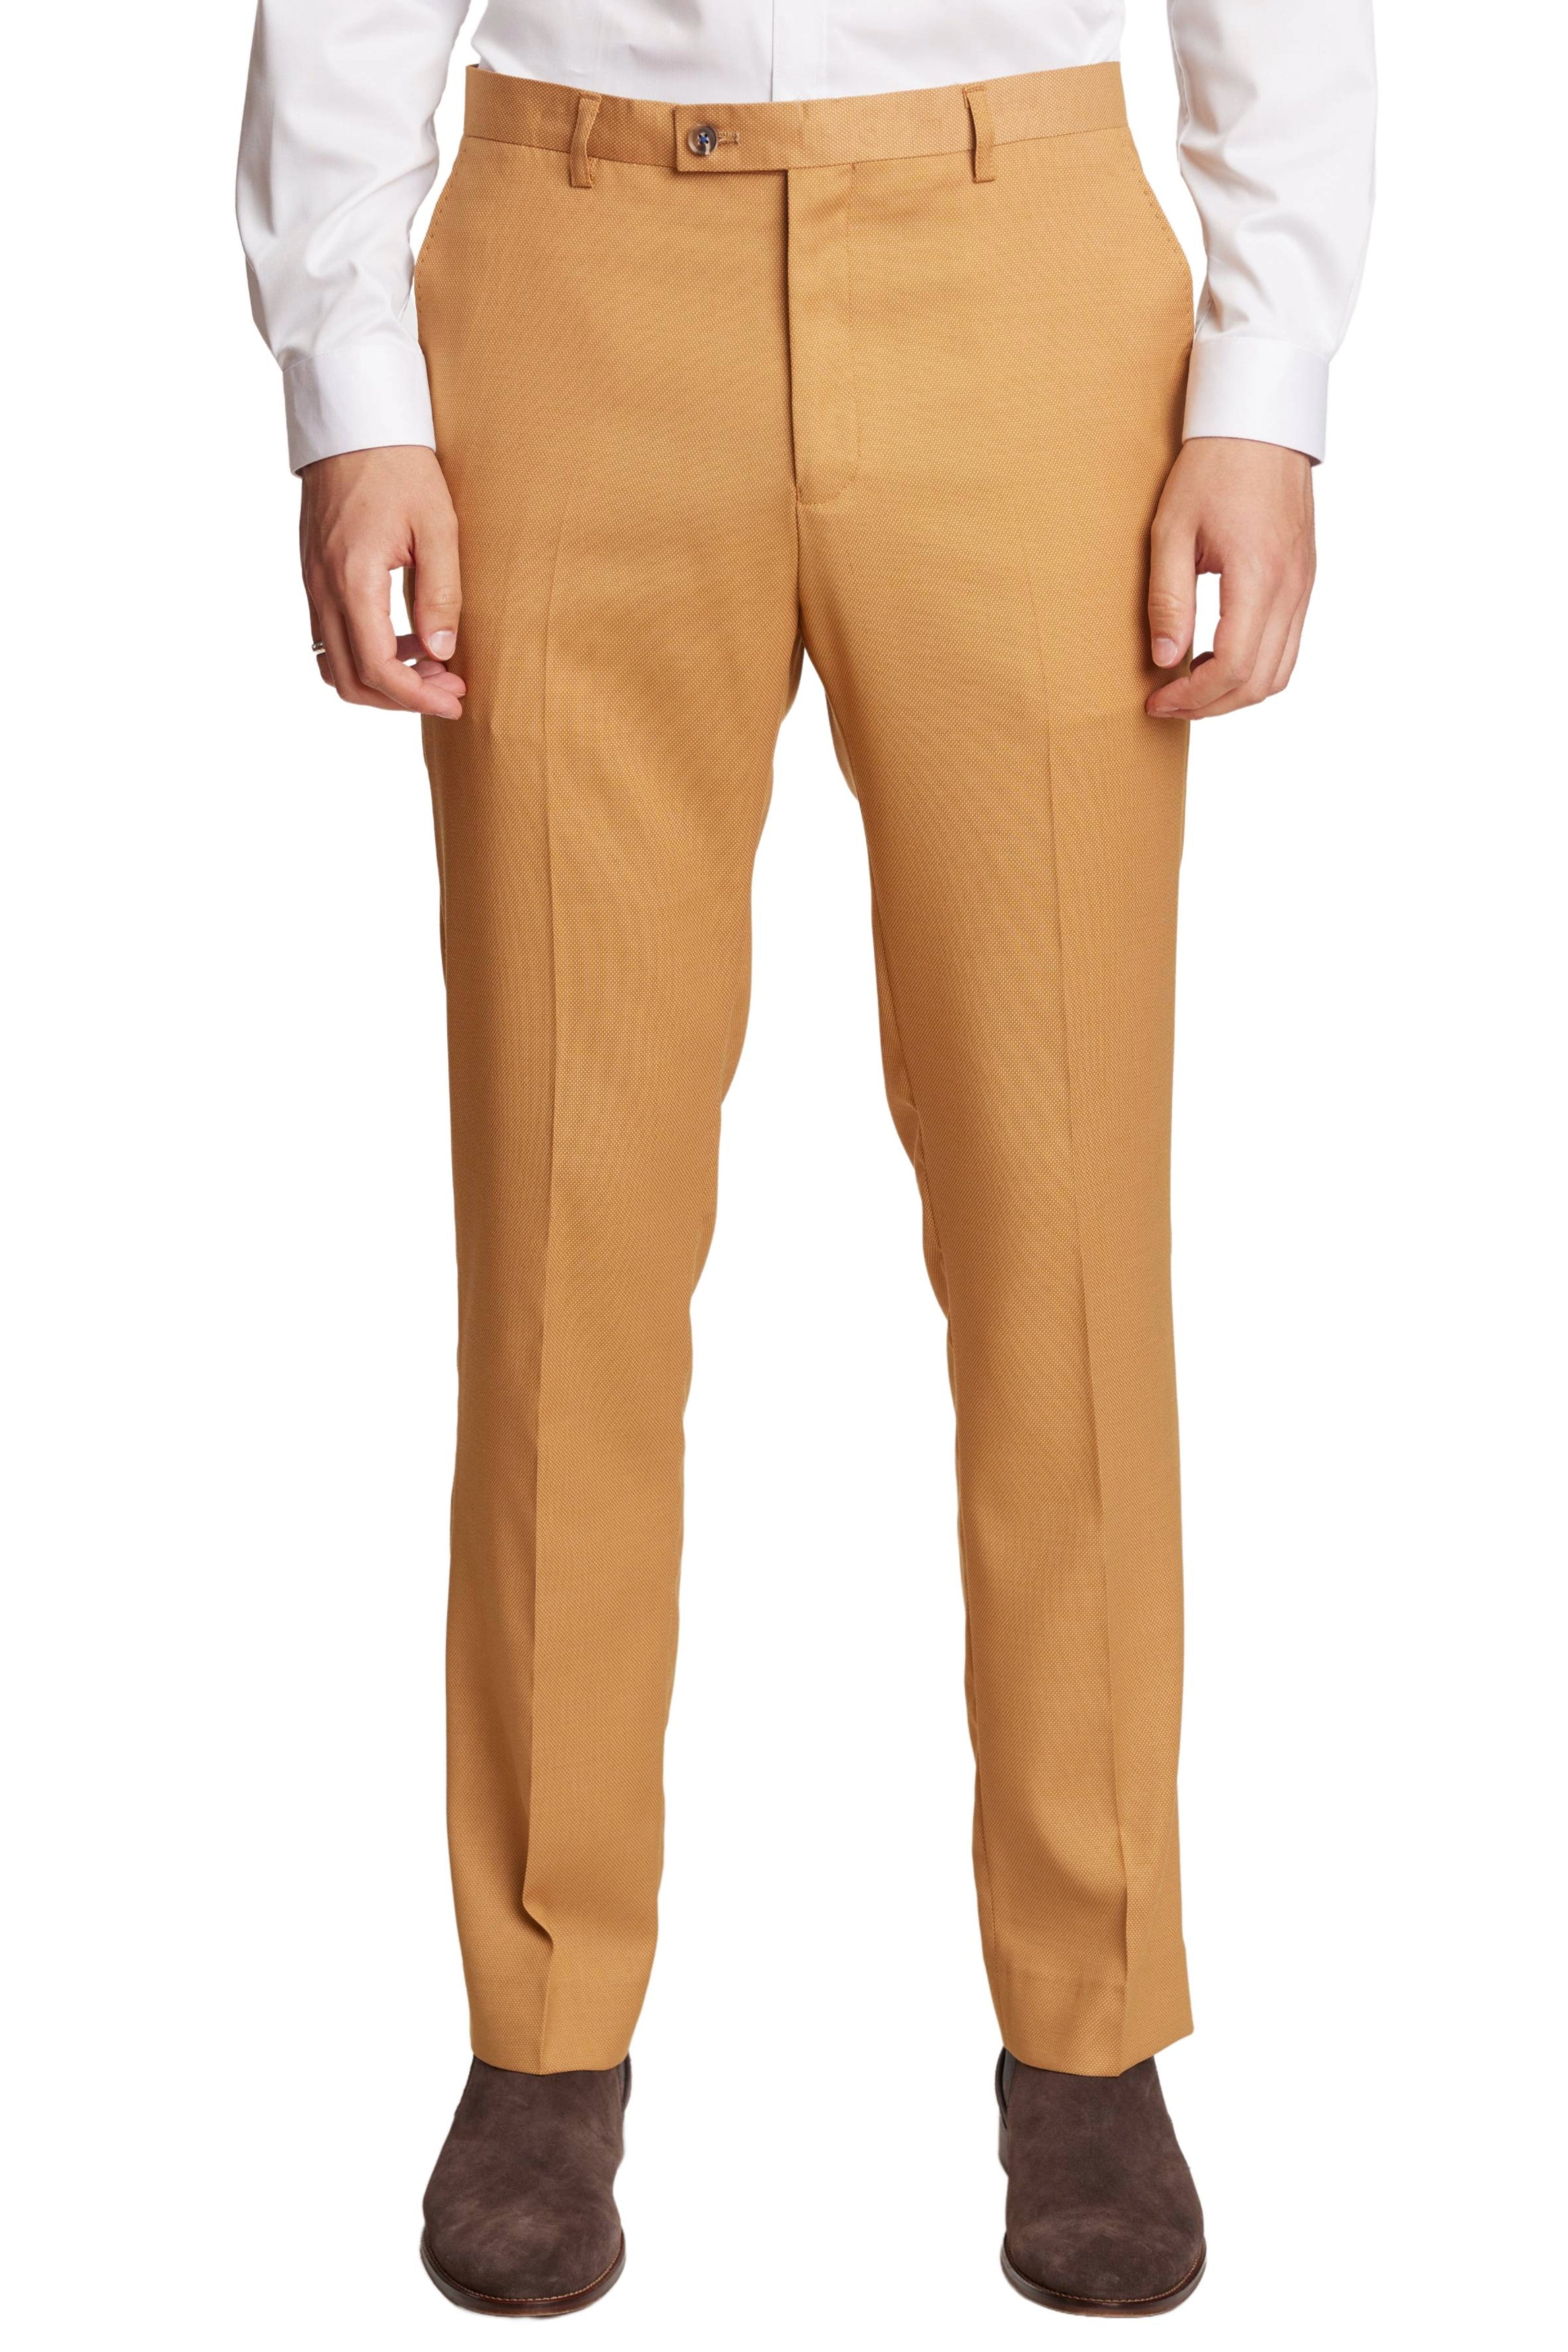 Buy Arrow Windowpane Check Hudson Tailored Fit Trousers - NNNOW.com